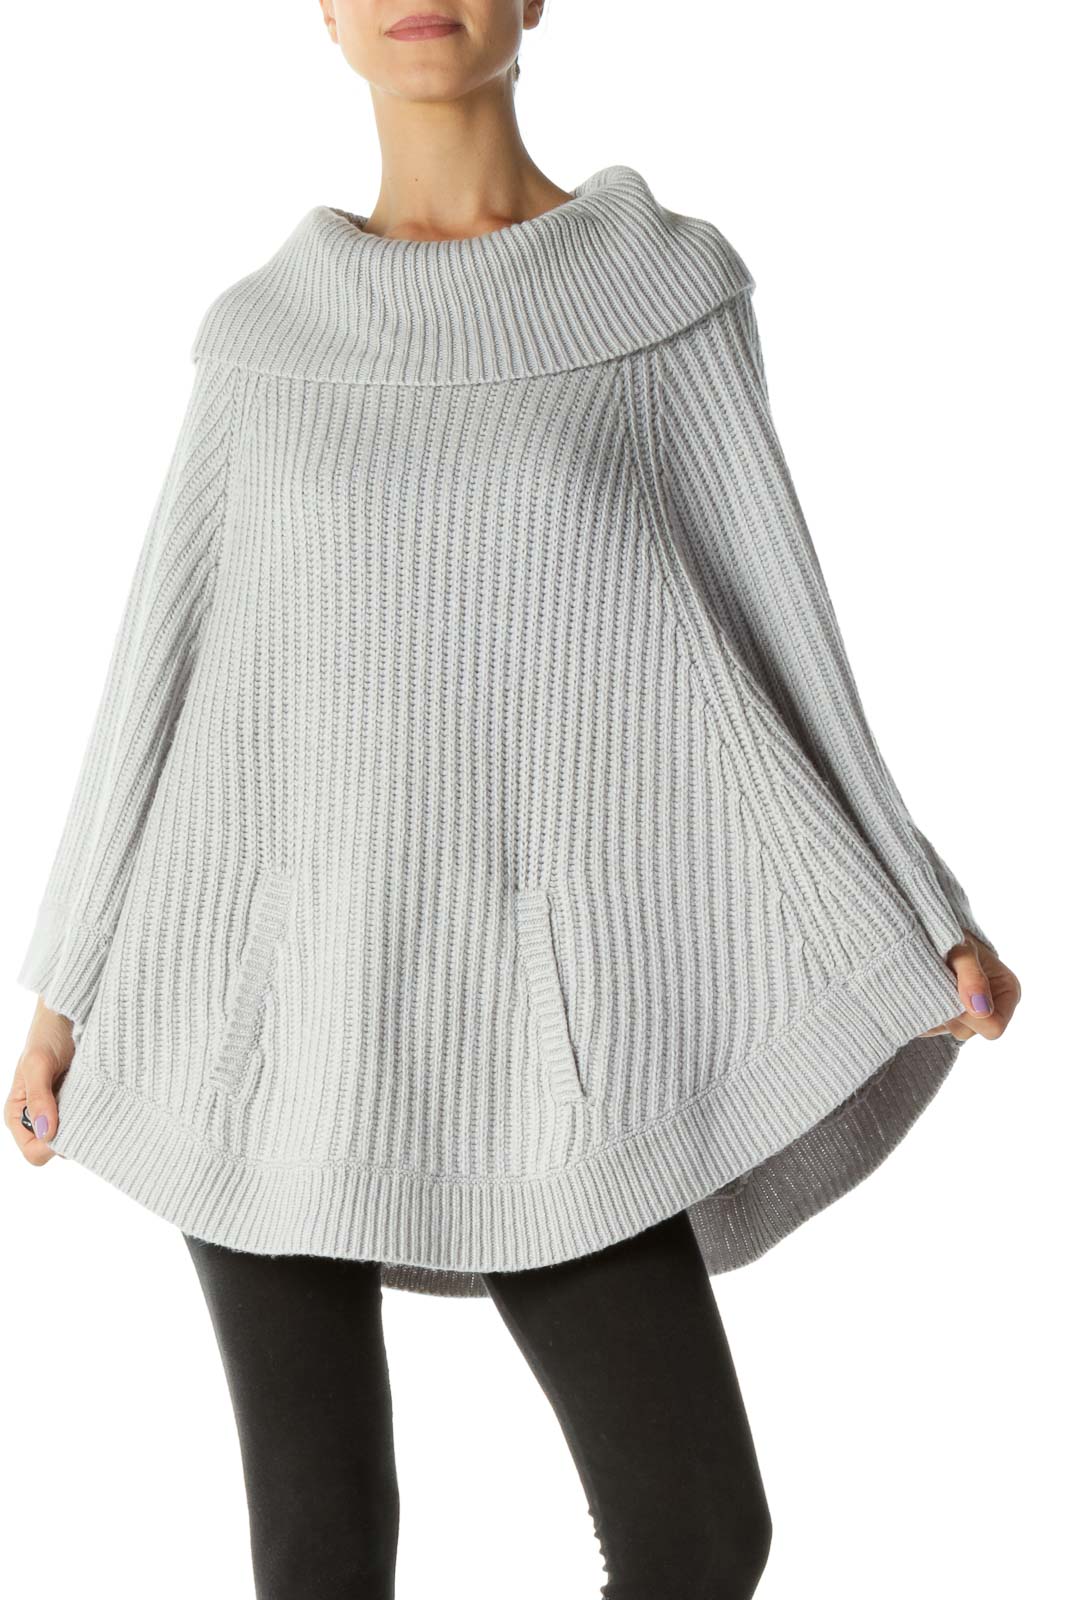 Gray Knit Cowl Neck Poncho  Front